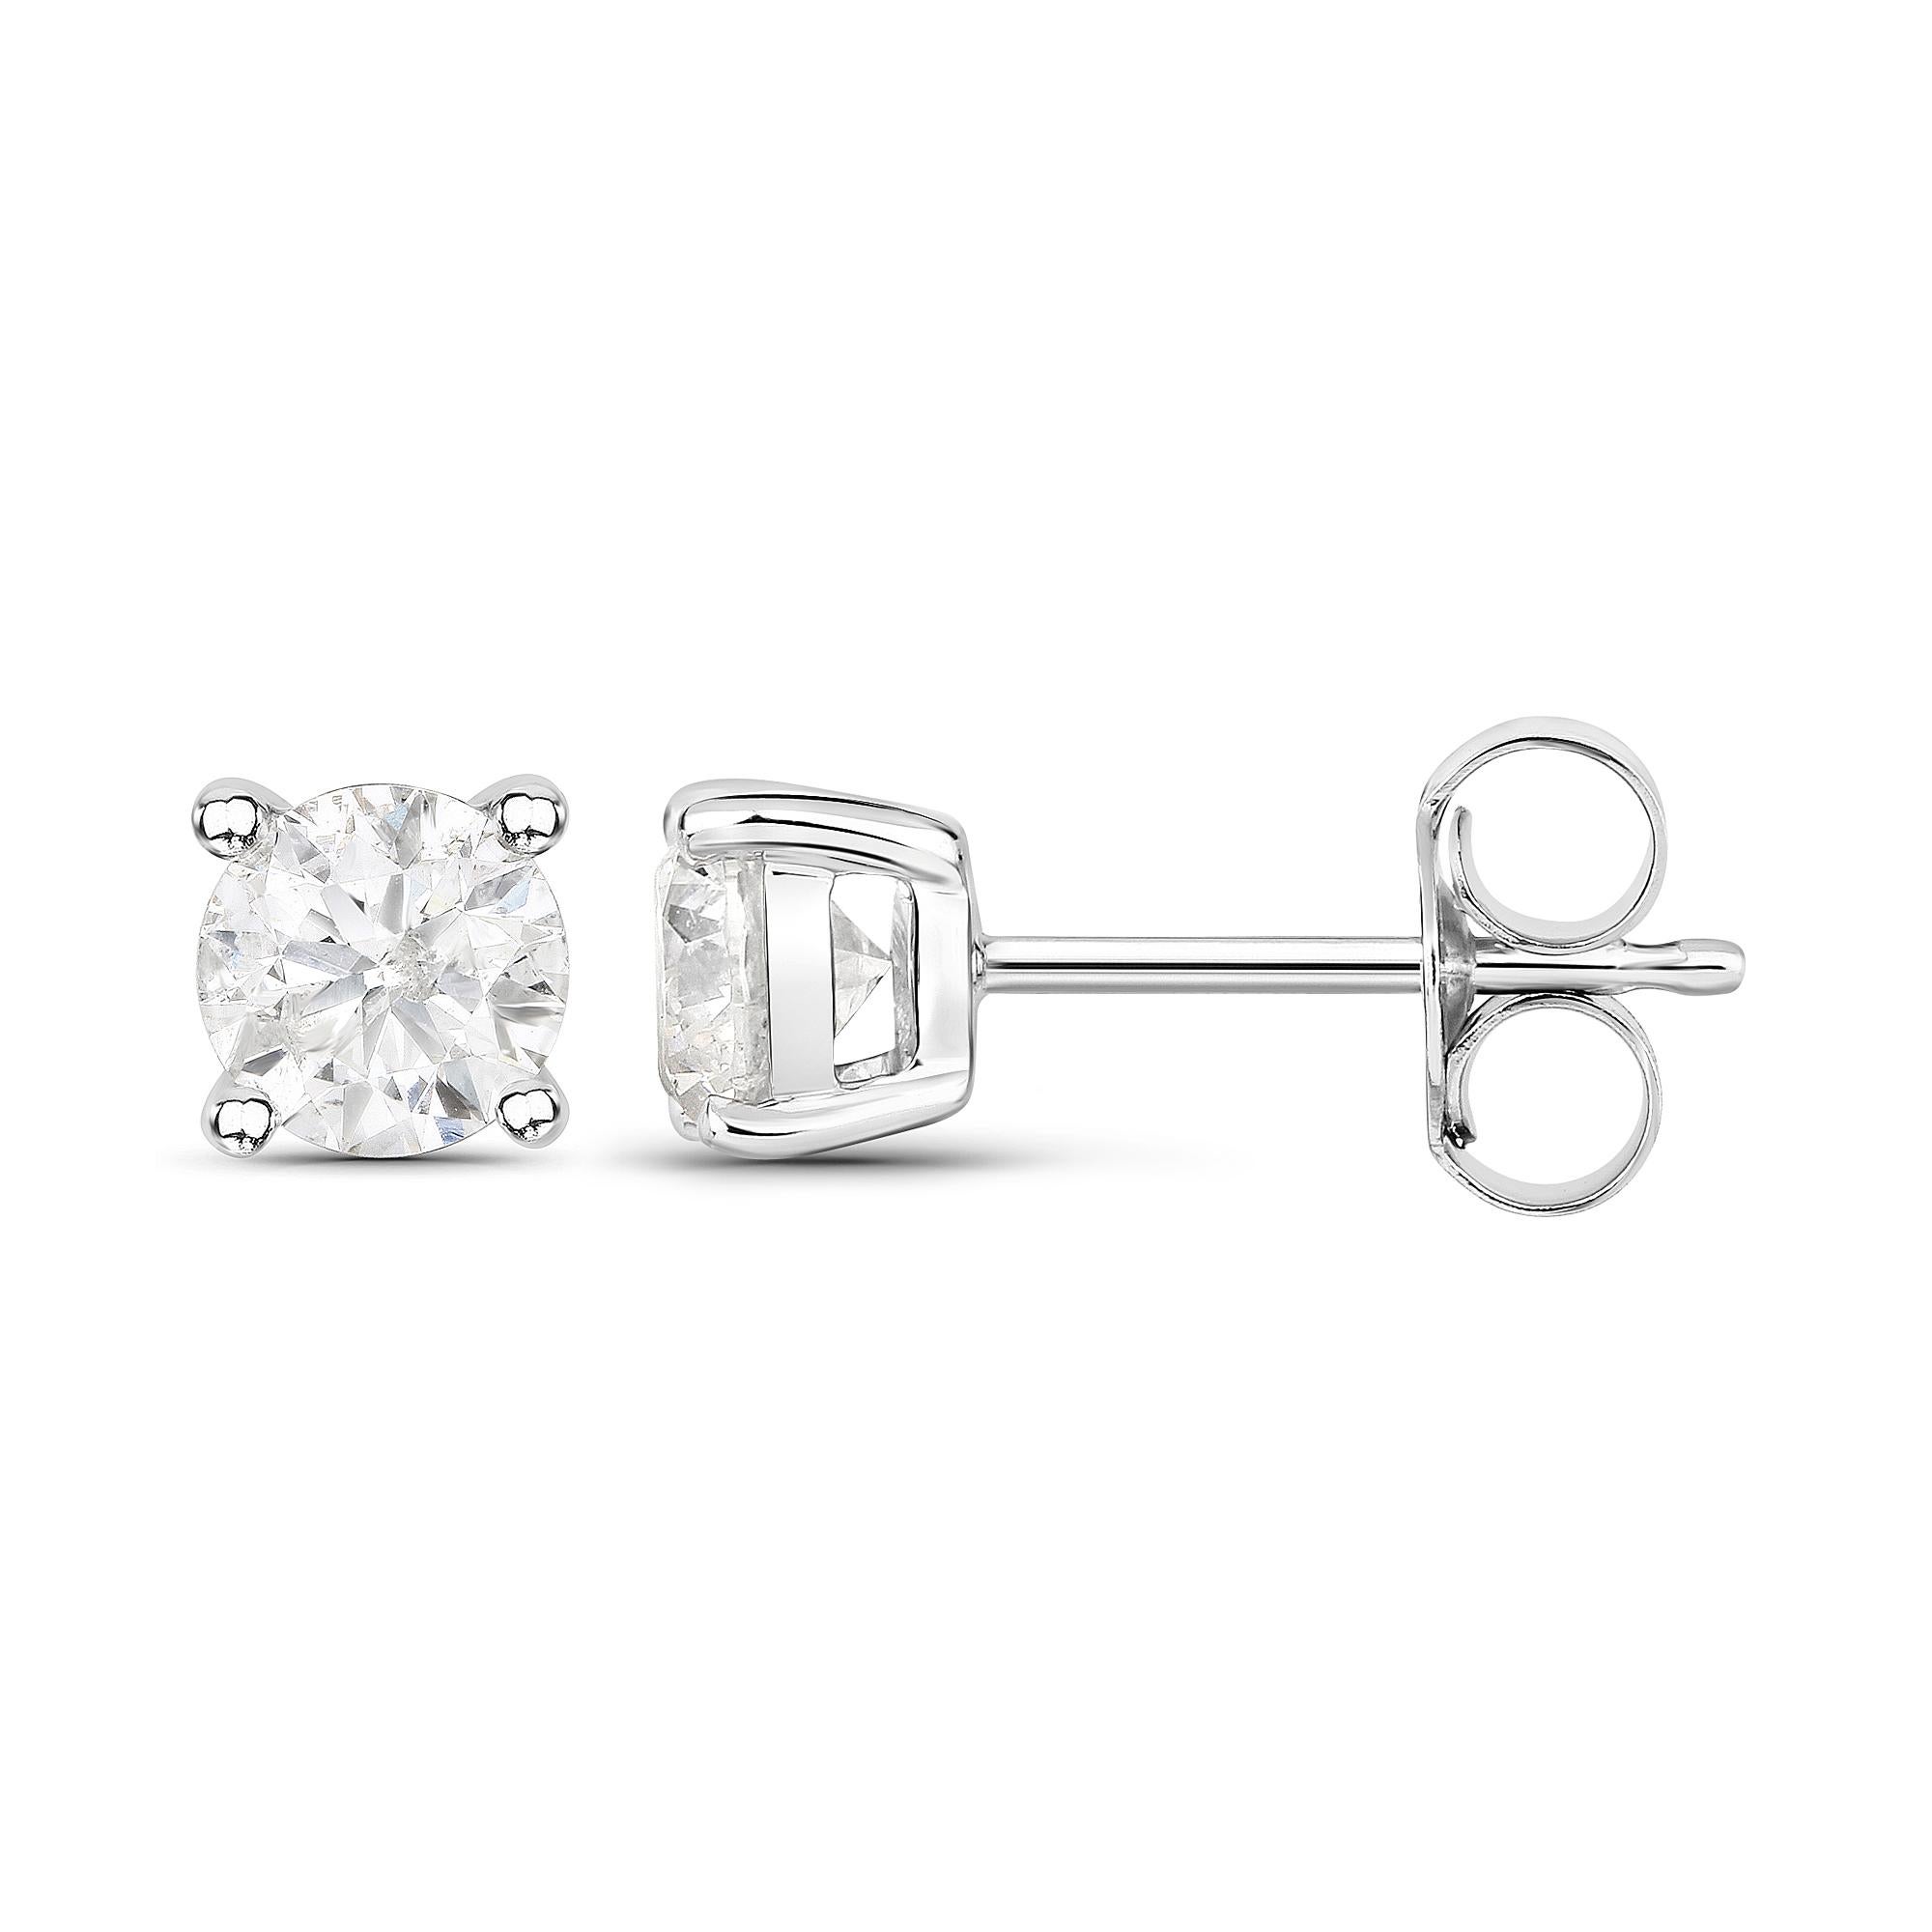 Flaunt yourself with these white diamond stud earrings. The natural gemstones have a combined weight of 1.02 carats and are set in 14K white gold. The white hue of these earrings adds a pop of color to any look! The understated design and vibrant